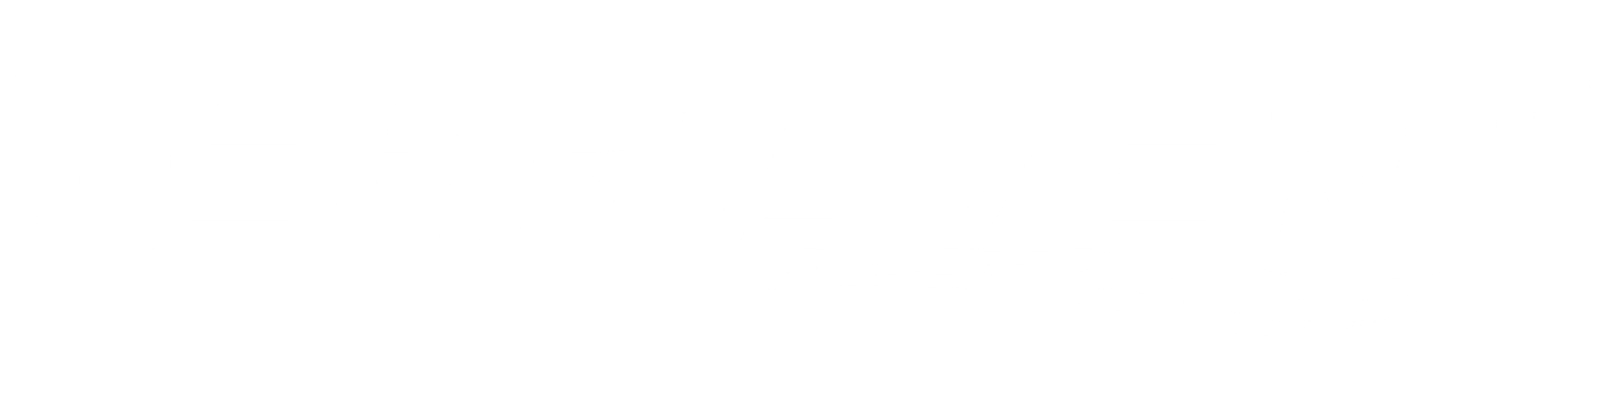 Get More Coupon Codes And Deals At Terravent Kayak